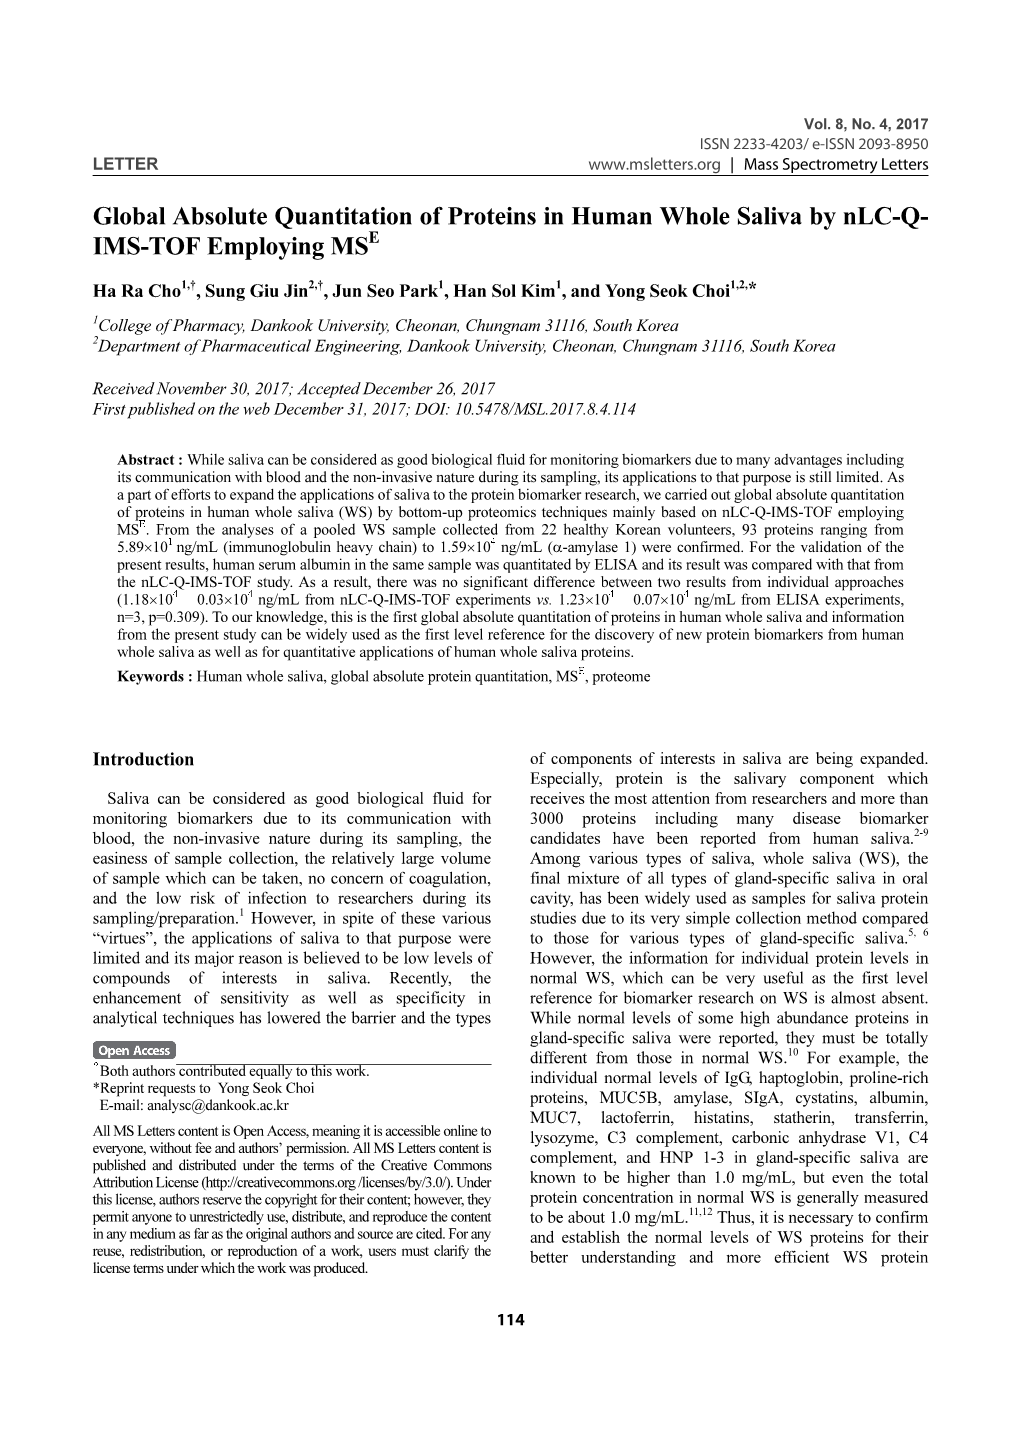 Global Absolute Quantitation of Proteins in Human Whole Saliva by Nlc-Q- IMS-TOF Employing MSE